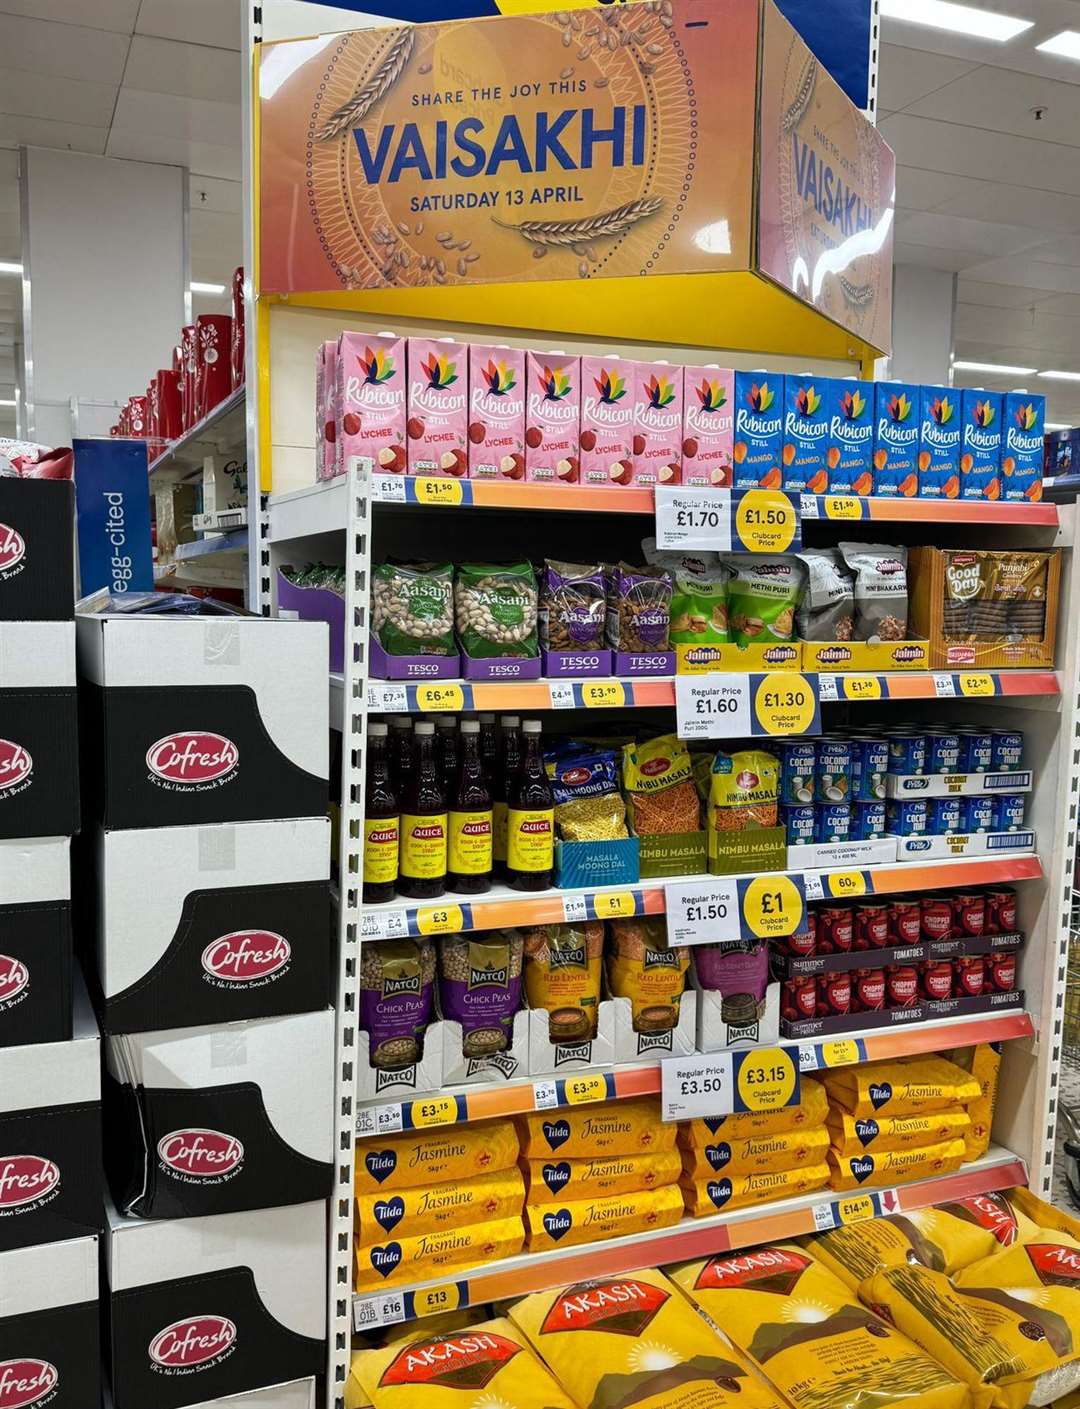 A Vaisakhi display in the Hoover Building Tesco Superstore